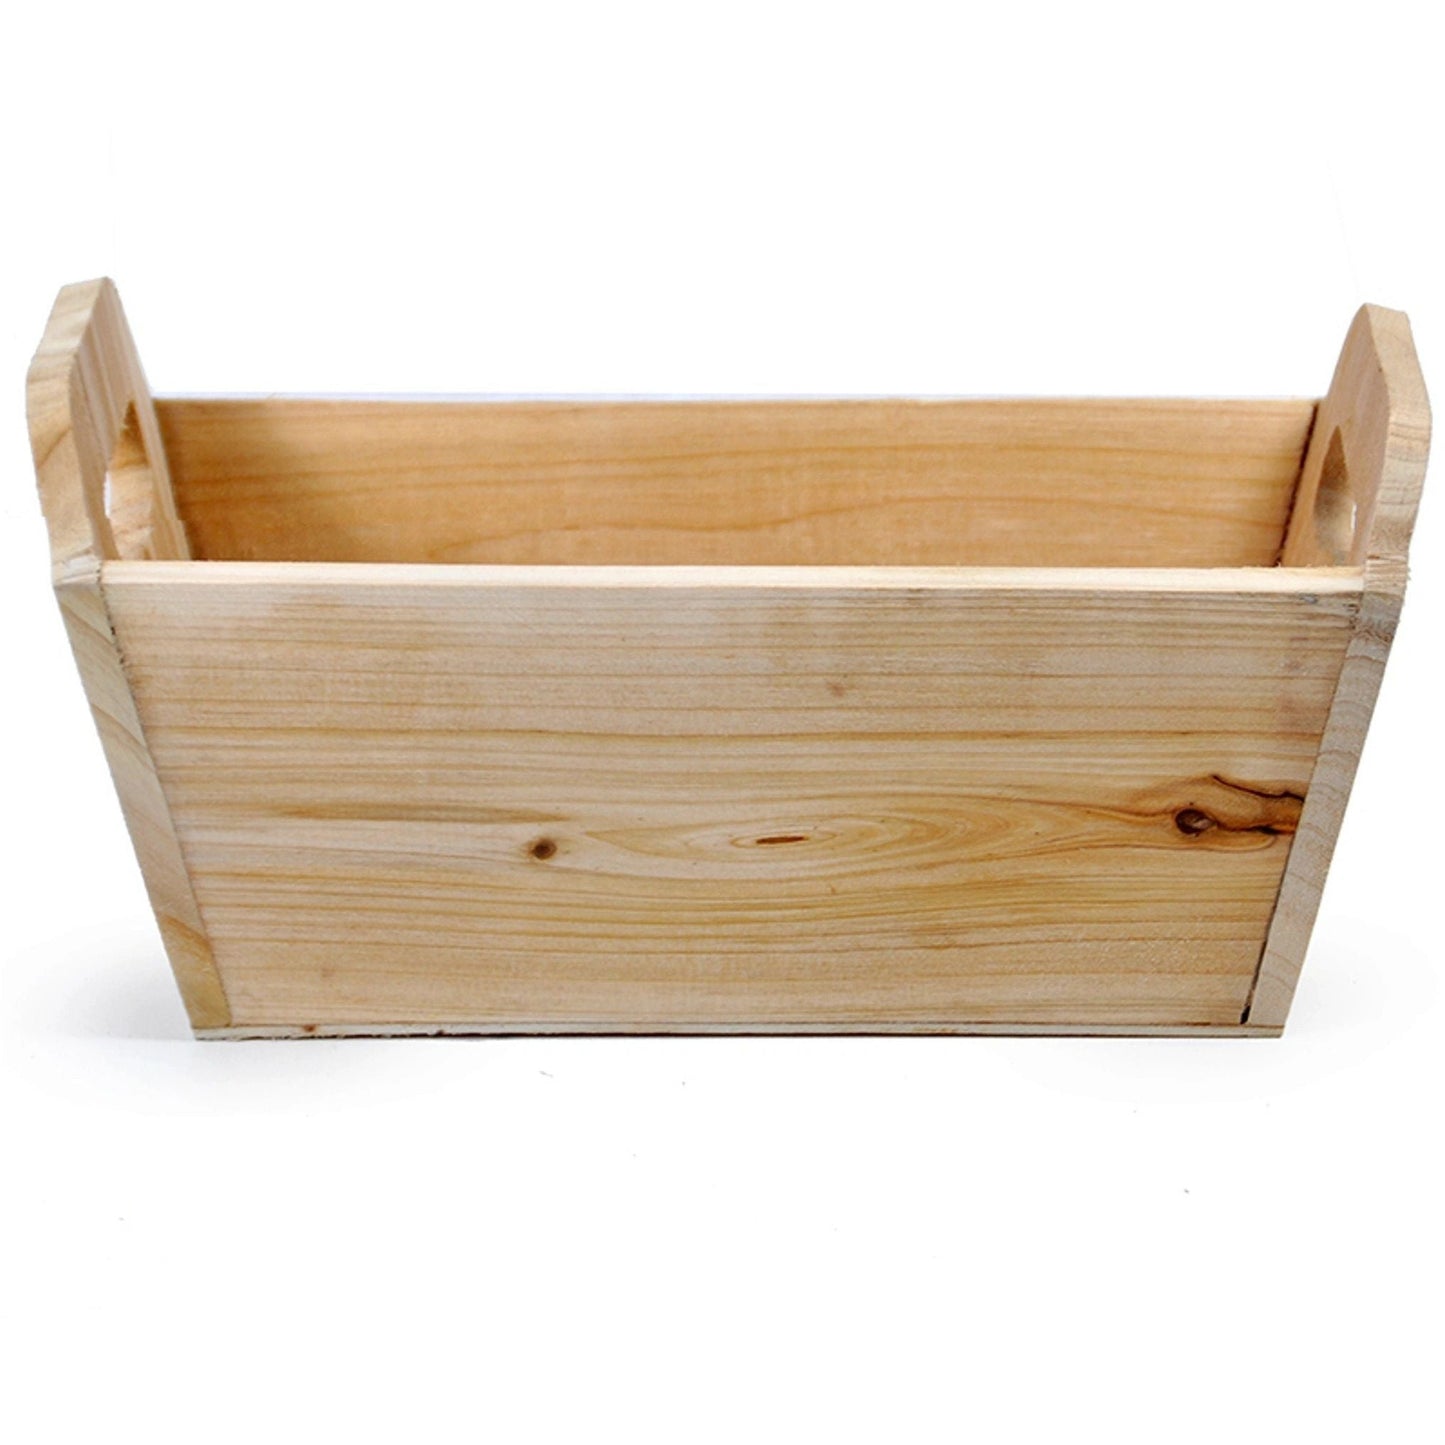 Natural Color Wood Tray with In - Handles